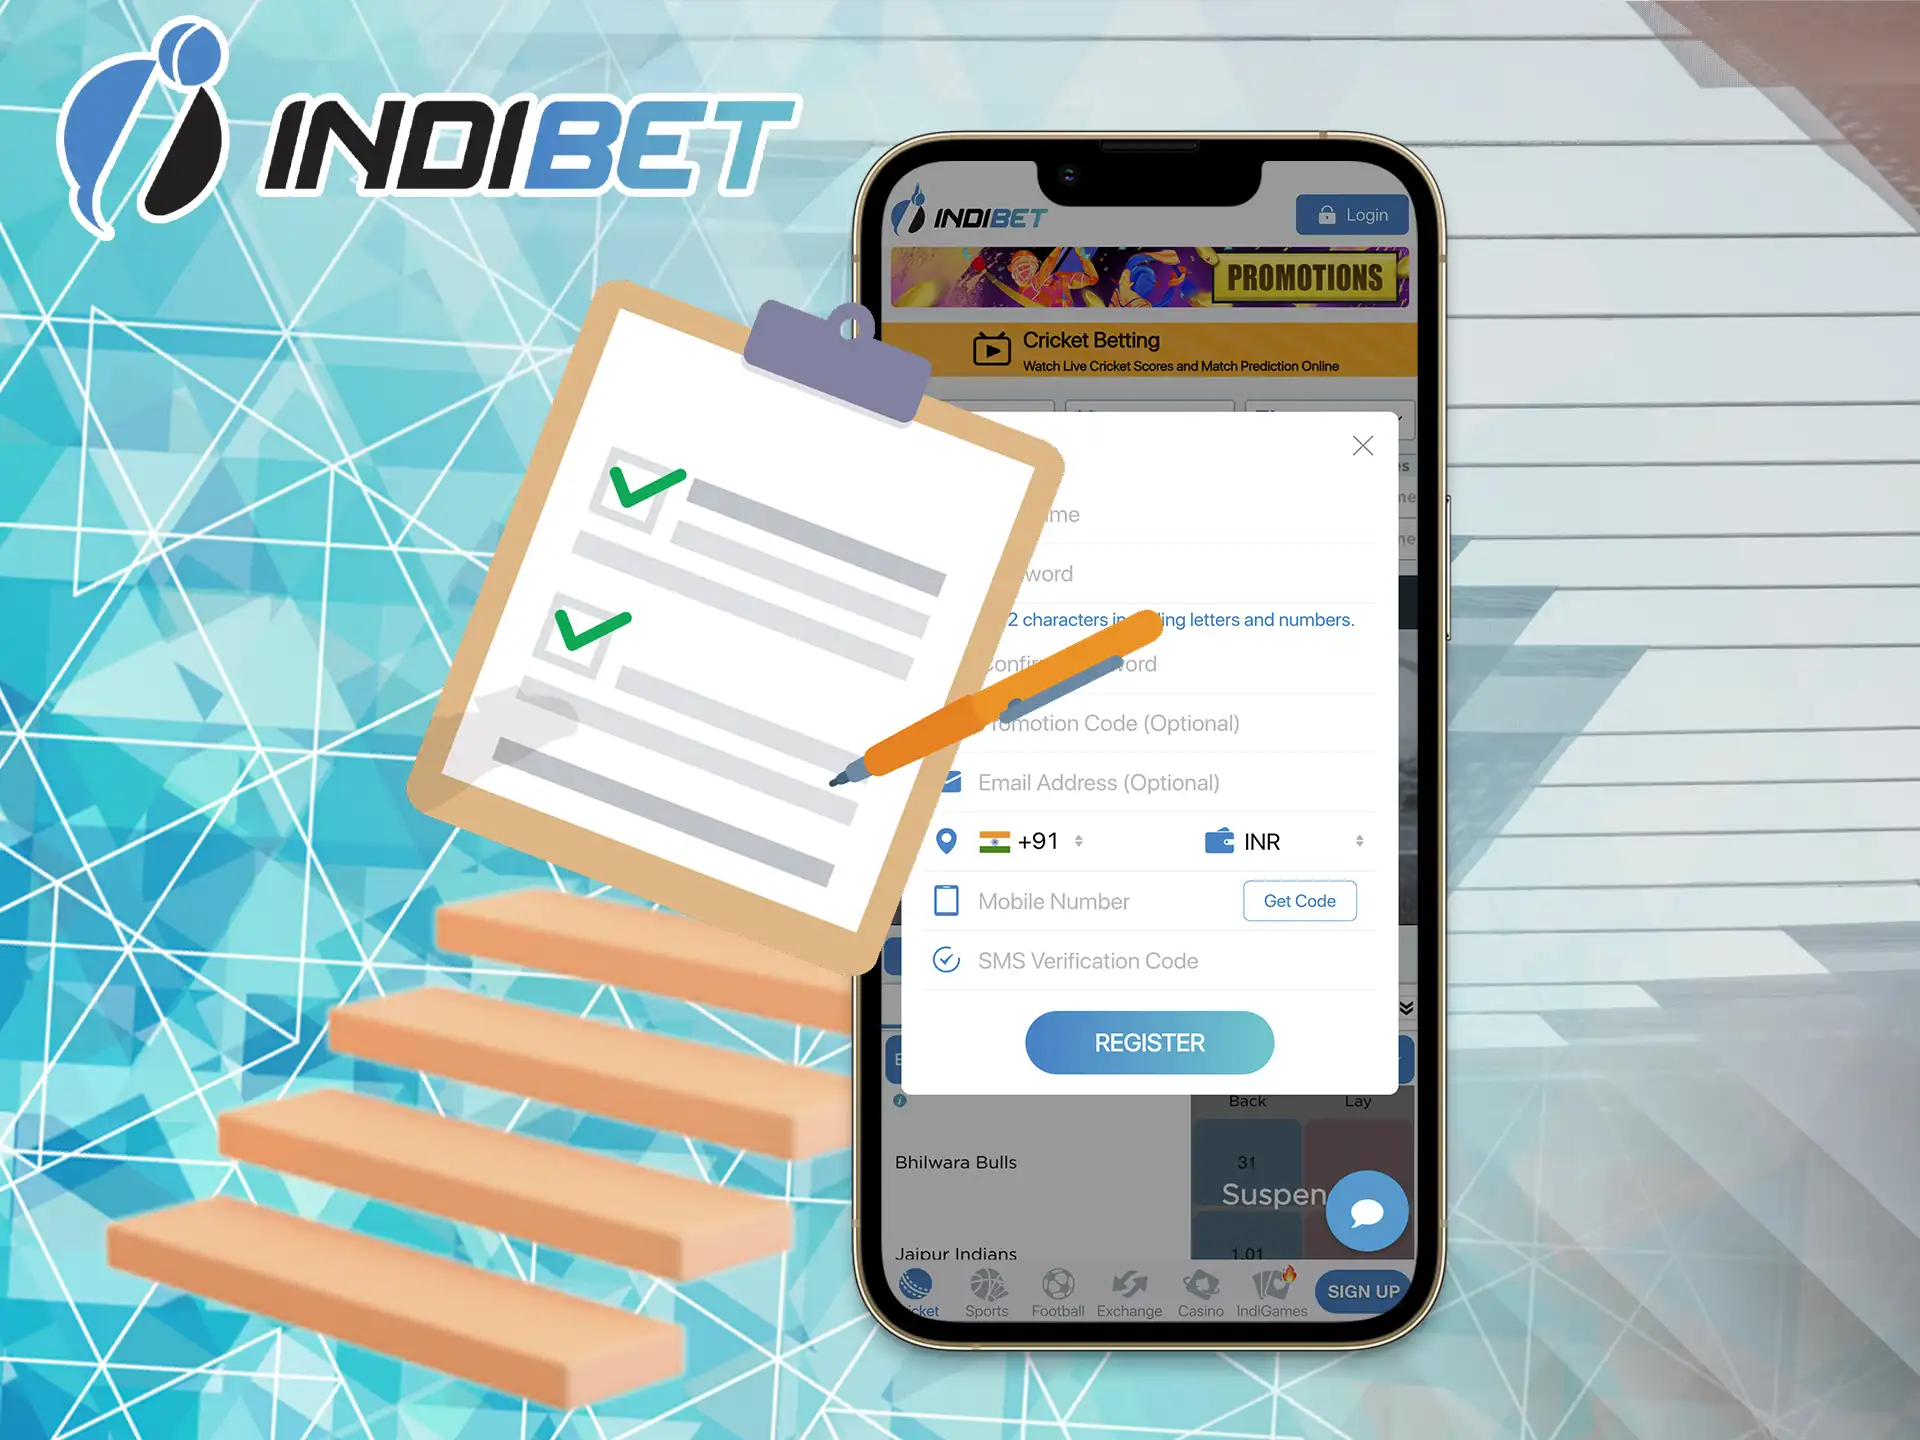 If for some reason you can't create an account in Indibet, our guide will help you do it quickly and without stress.